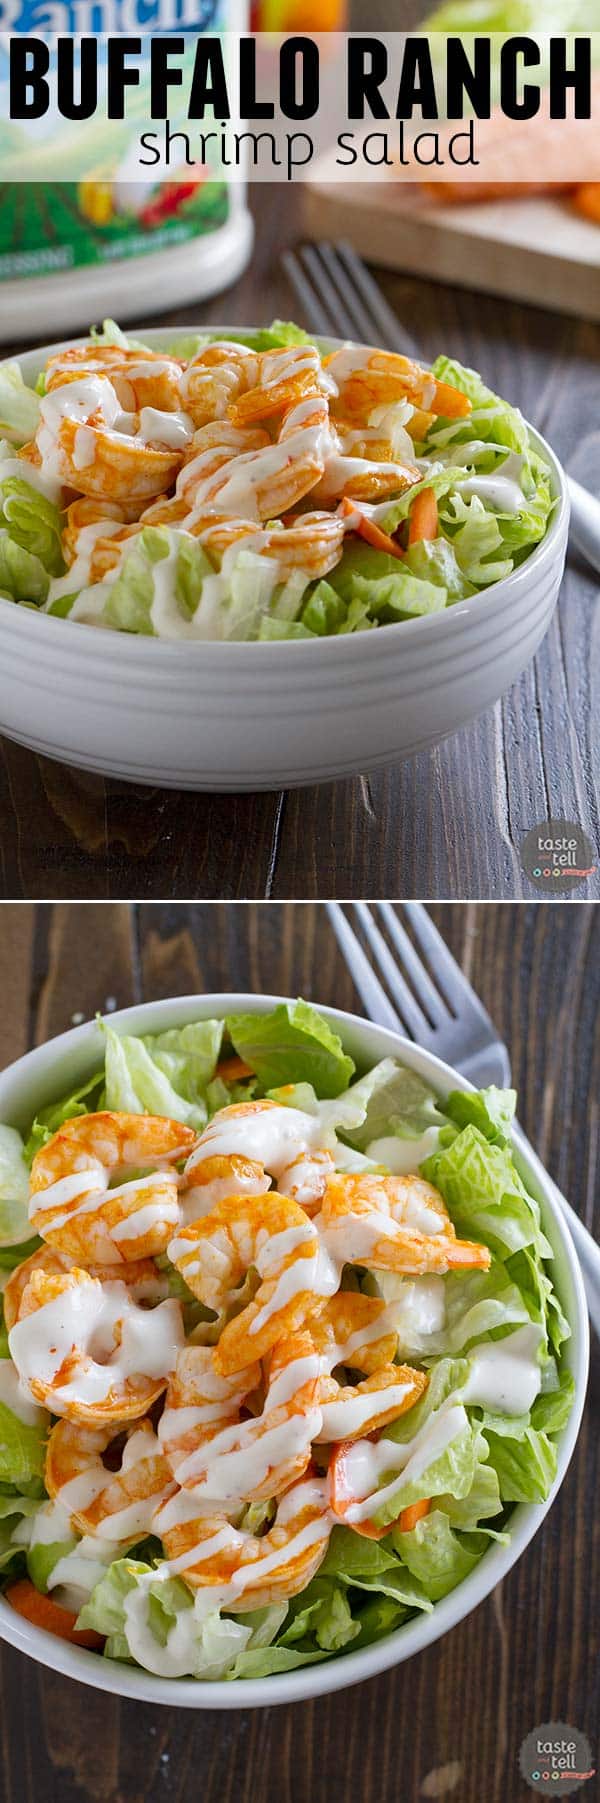 The perfect fast lunch, this Buffalo Ranch Shrimp Salad is spicy and creamy and done in 10 minutes.